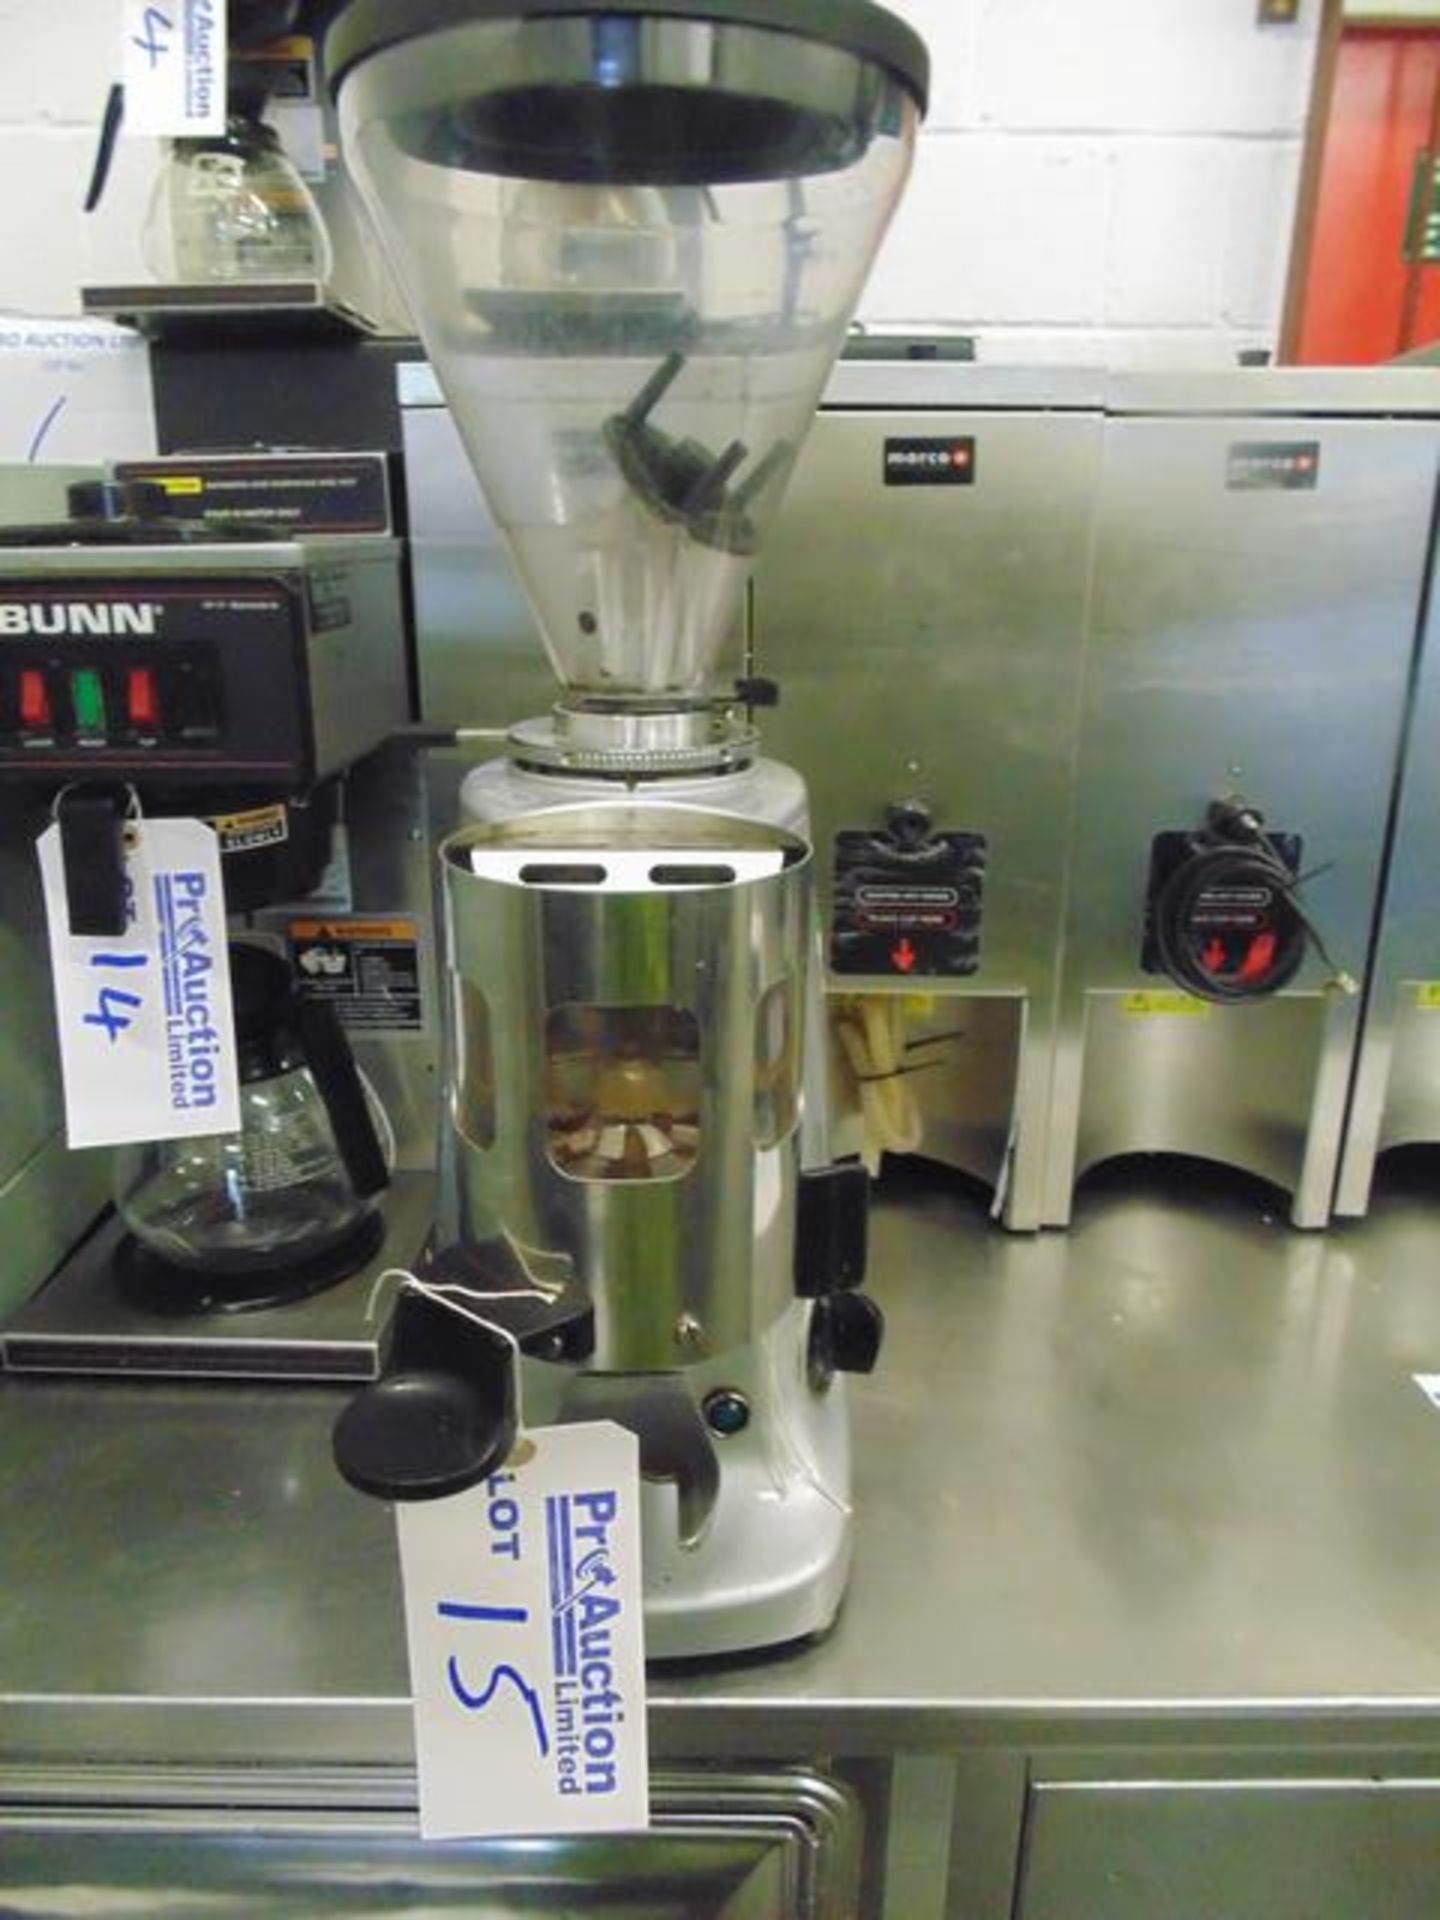 Mazzer Super Jolly Automatic Grinder perfect combination of quality, speed, reliability and cost